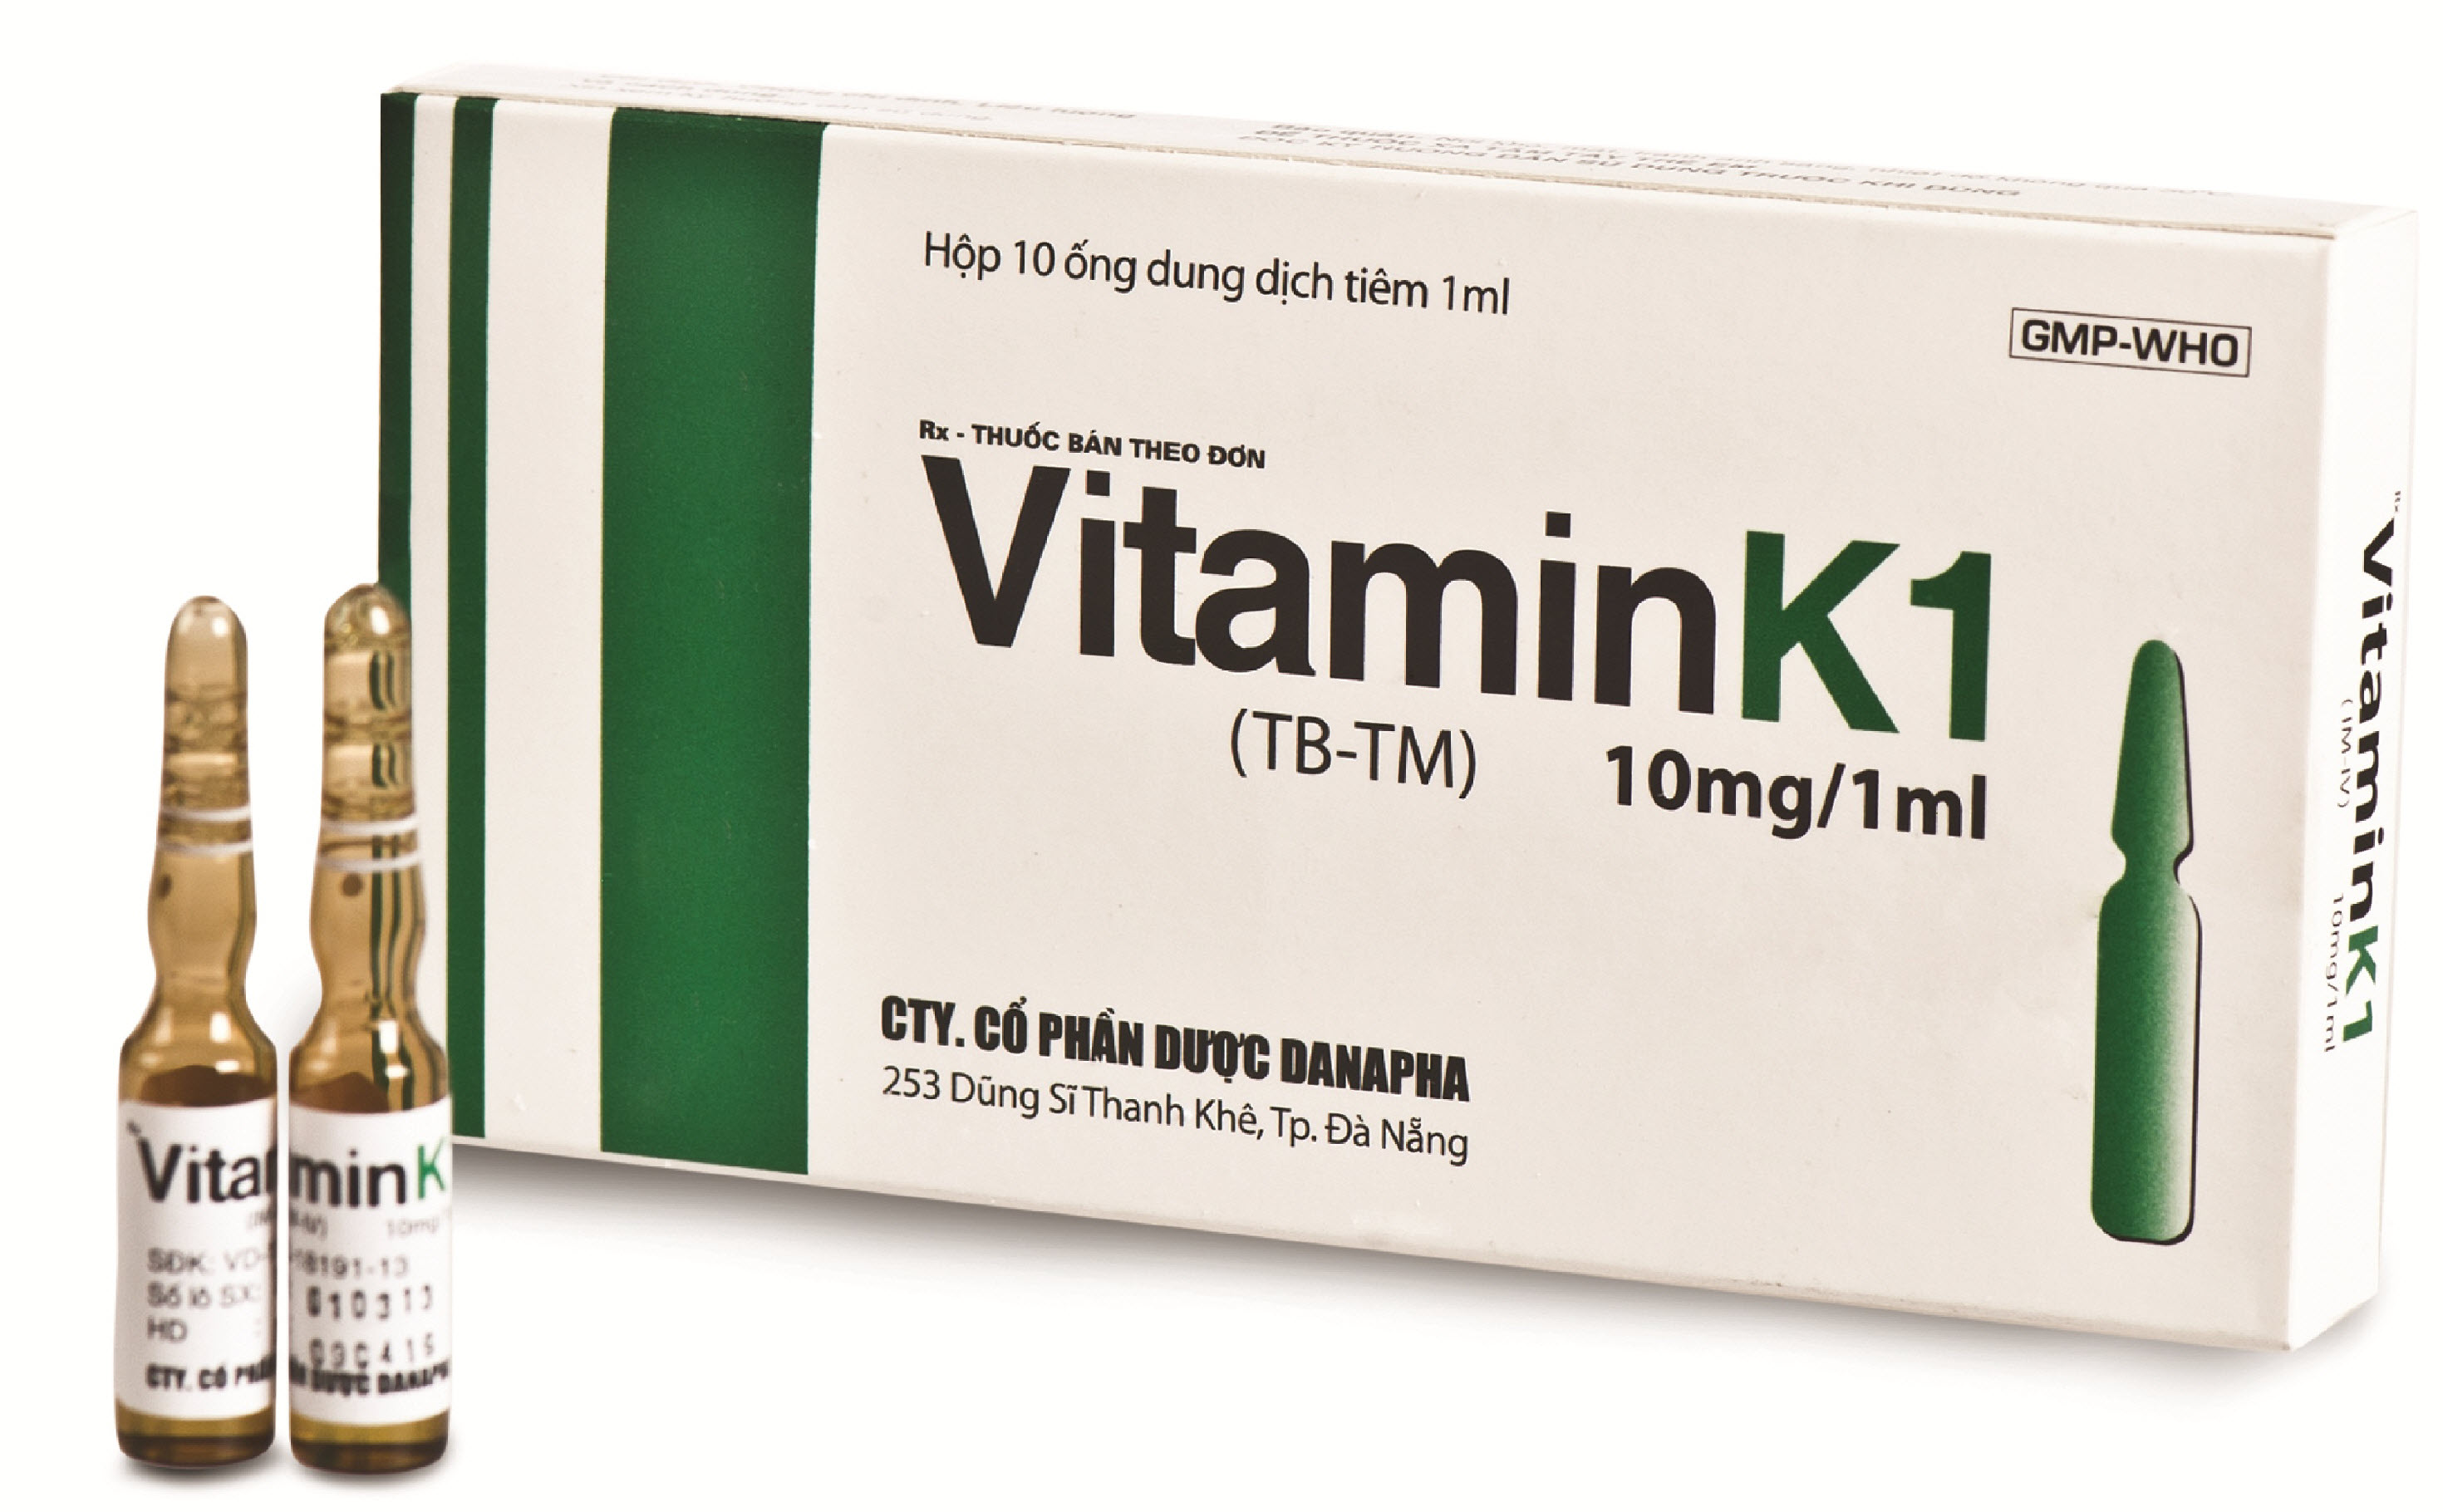 vitamin k1 is administered as an antidote for poisoning with